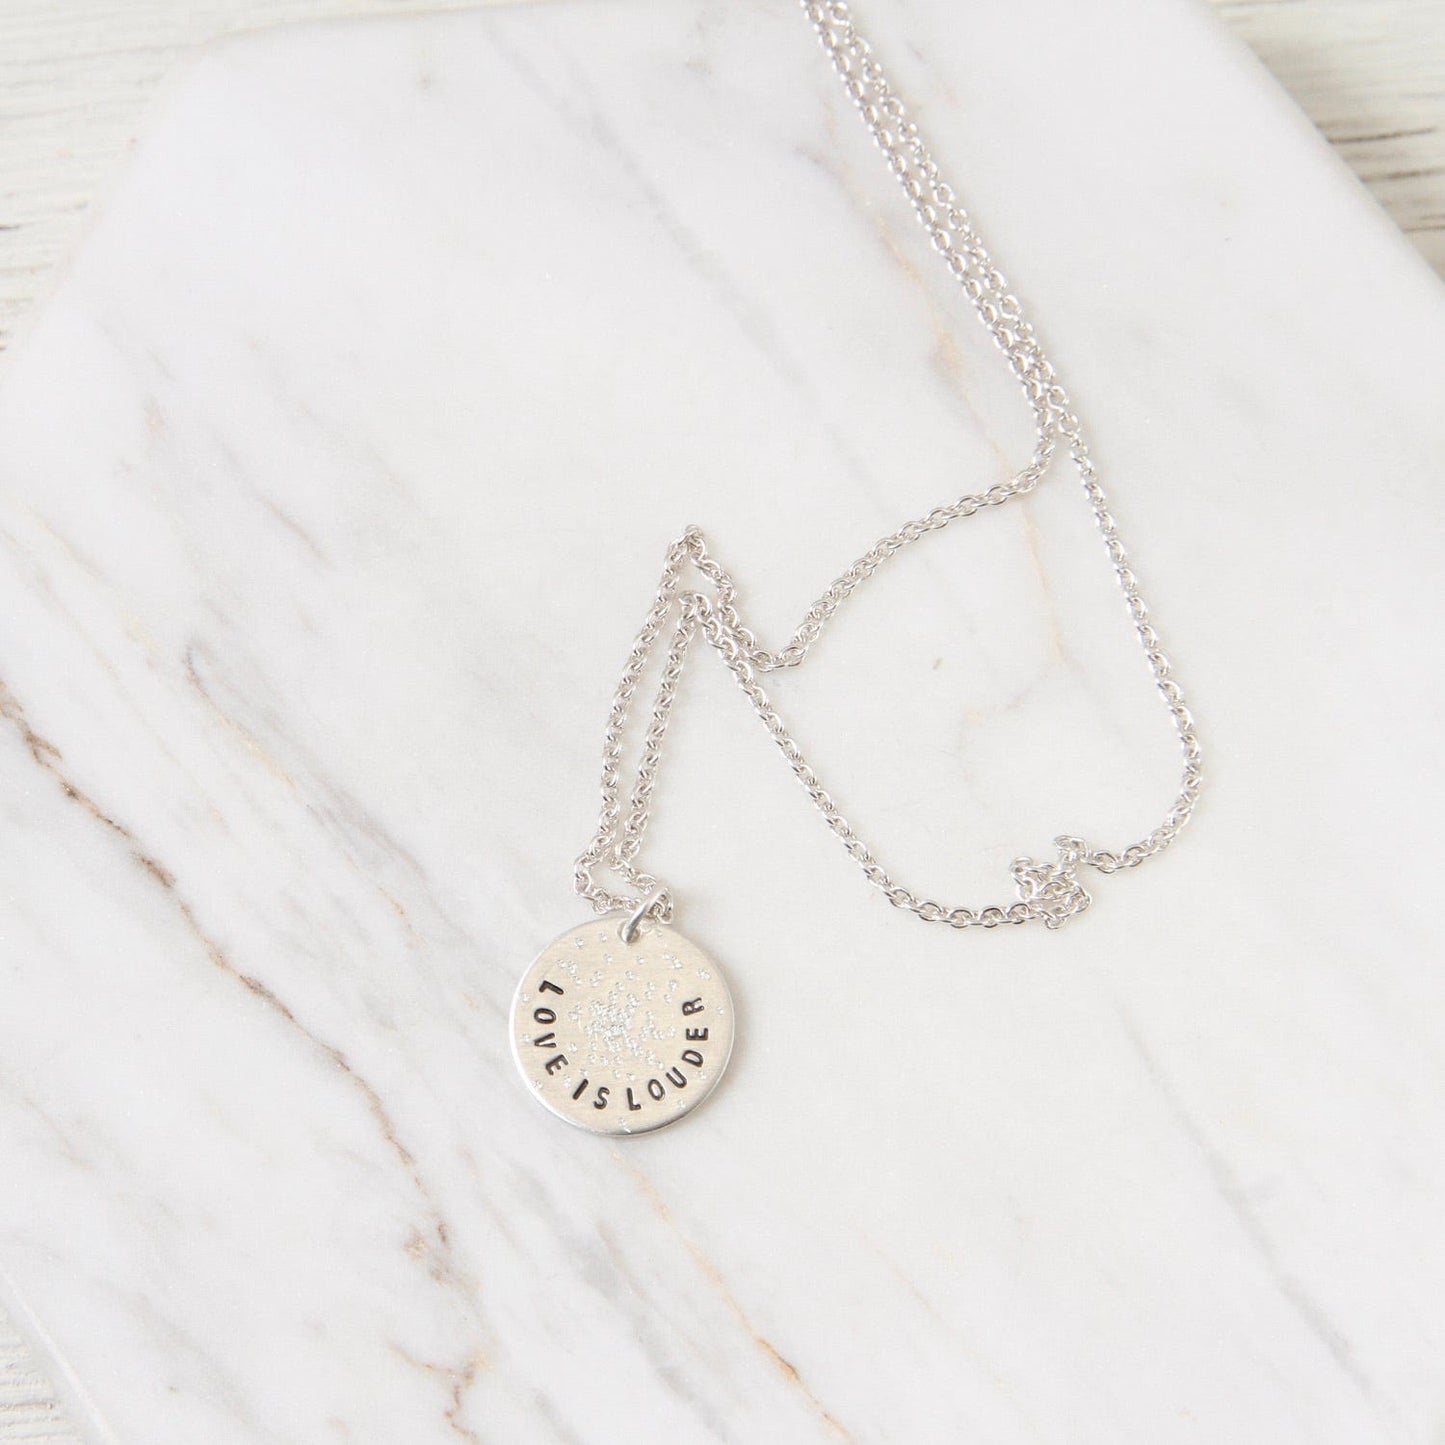 NKL Diamond Dusted Mini Coin Necklace - "Love is Louder"